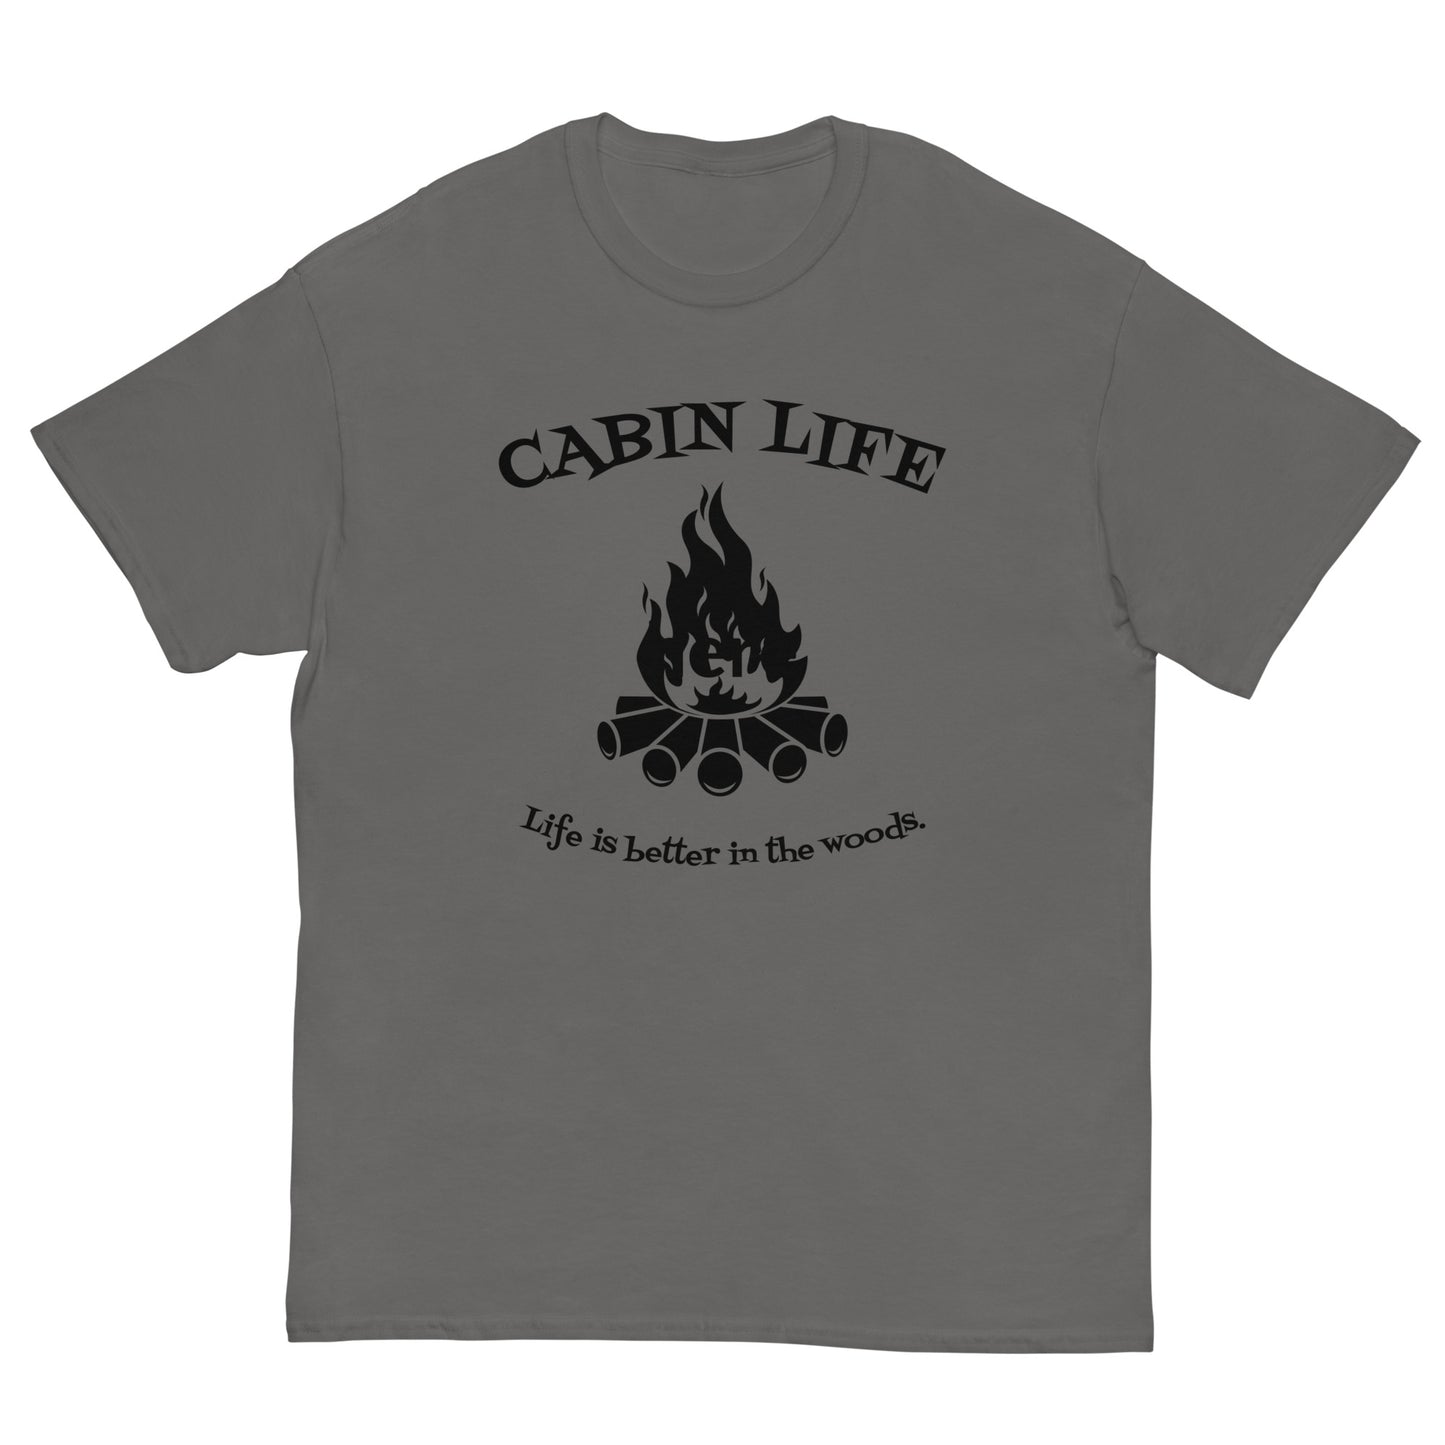 Cabin Life - Life is Better in the Woods classic tee